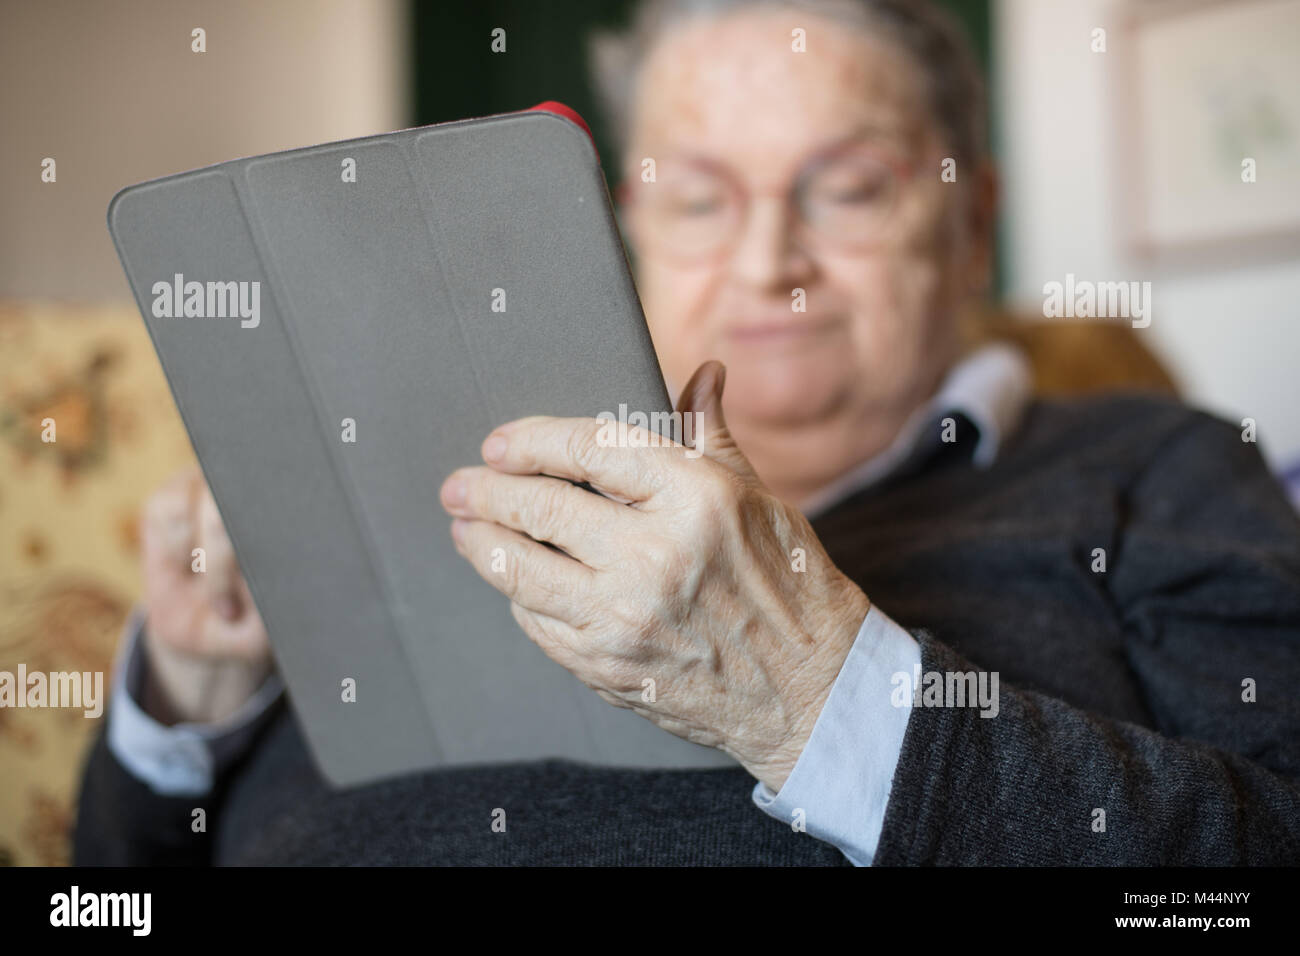 Elderly woman at home sitting on the sofa using tablet e-book portrait selective focus on hands Stock Photo